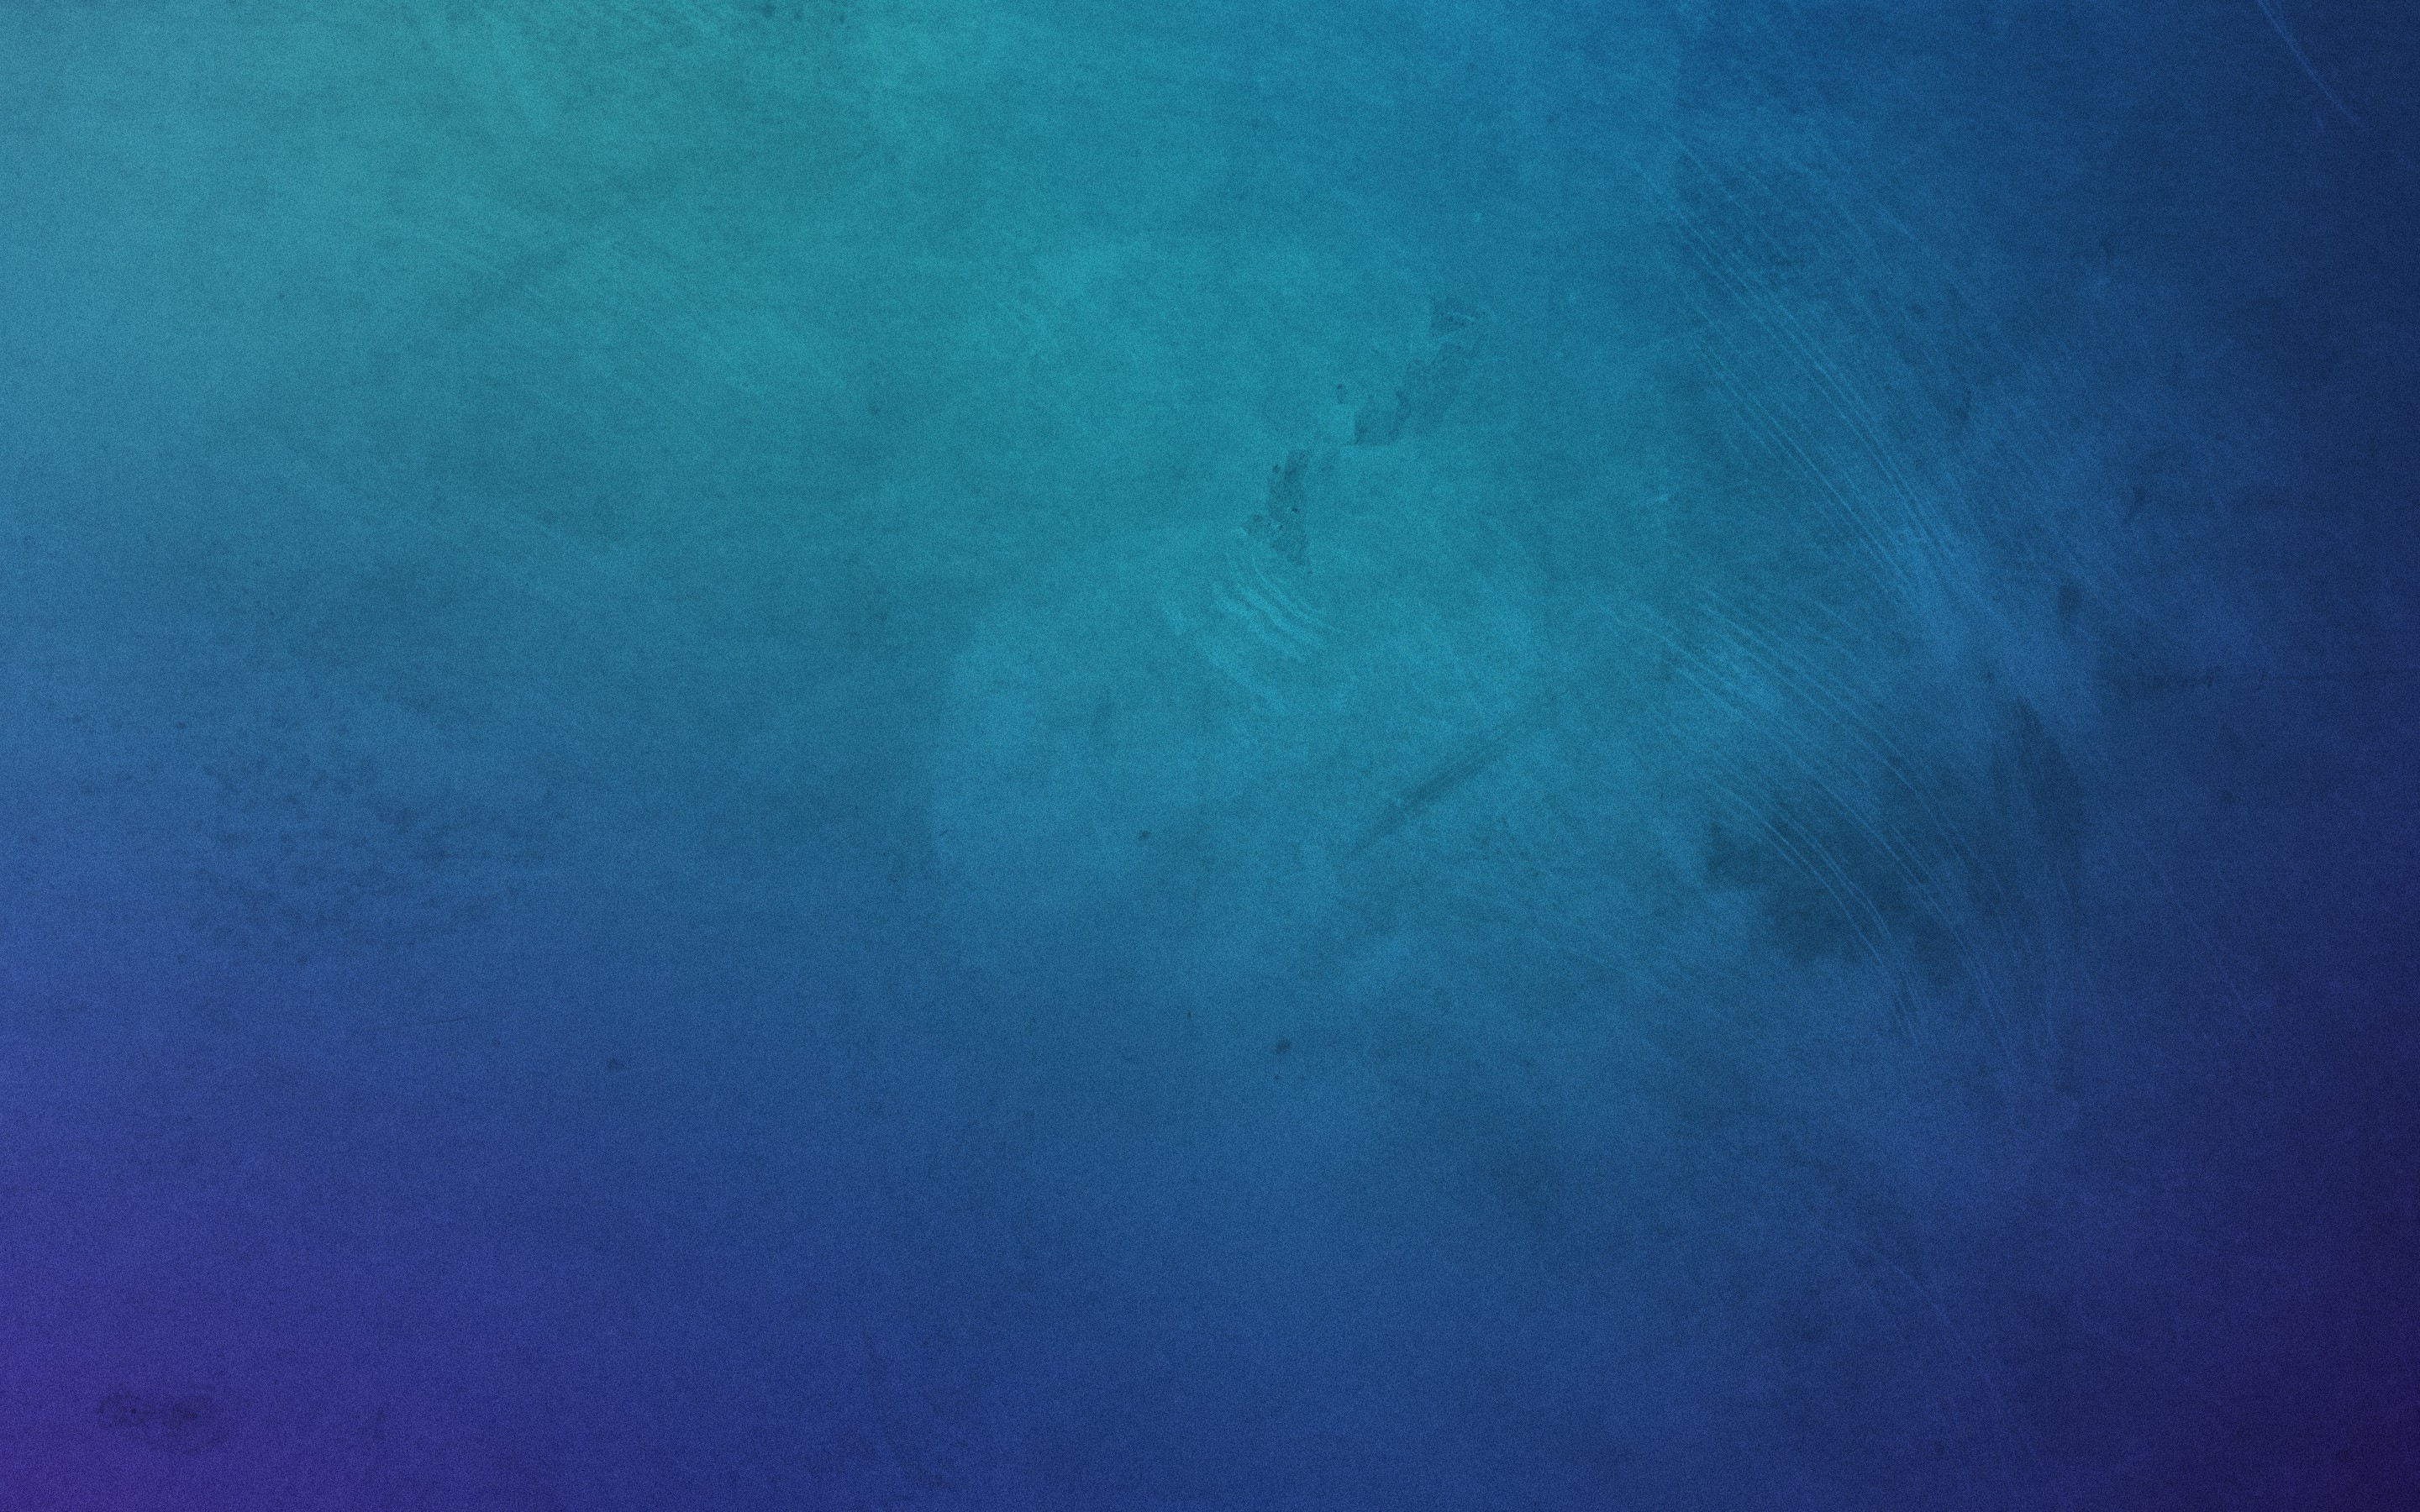 General 2880x1800 minimalism blue background abstract gradient texture